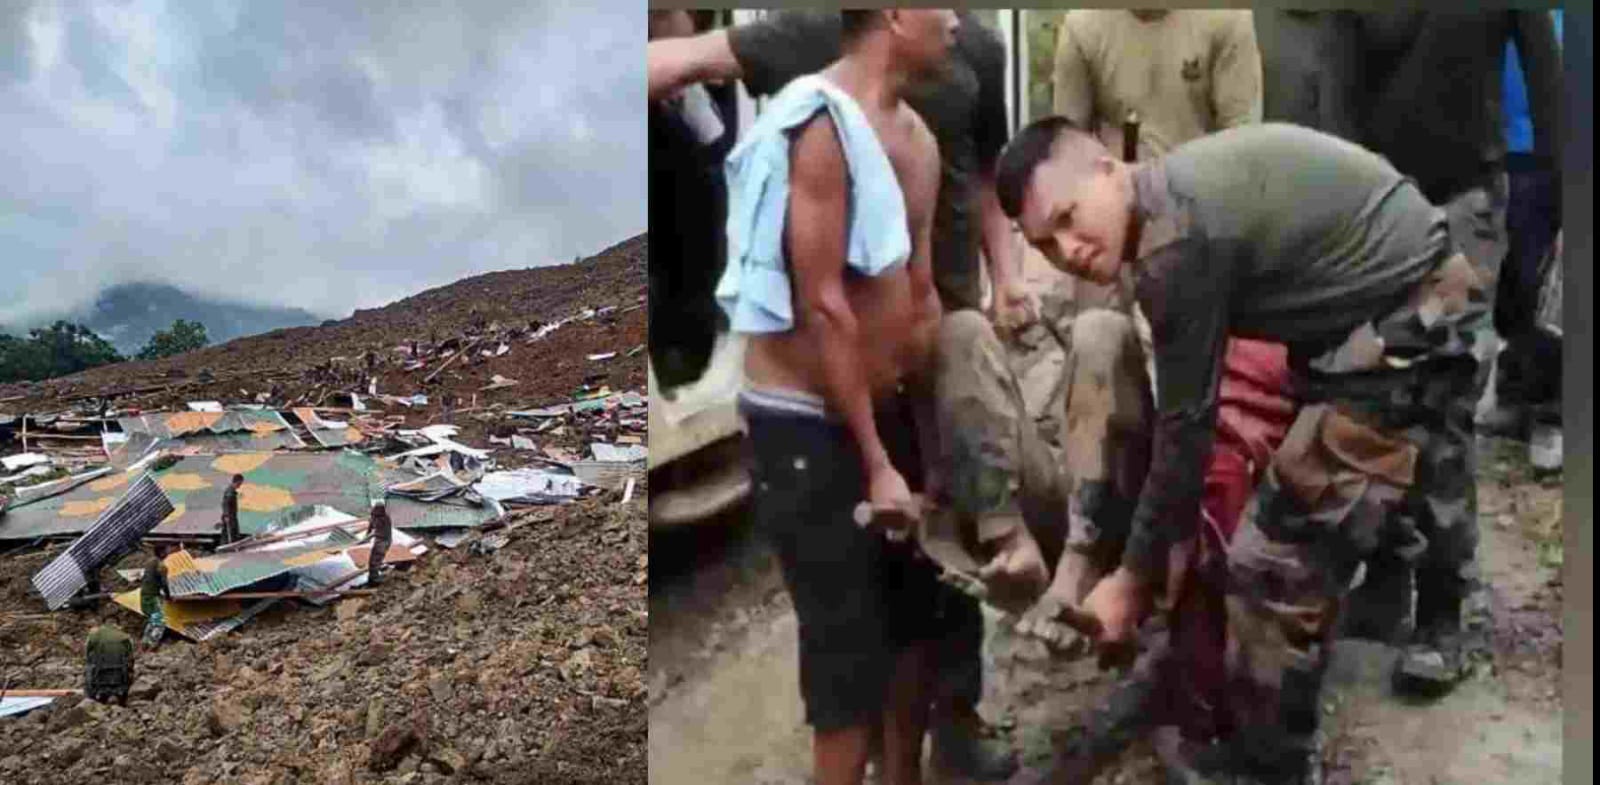 Massive landslide at Army Camp in Noni district of Manipur, 7 soldiers martyred till now.